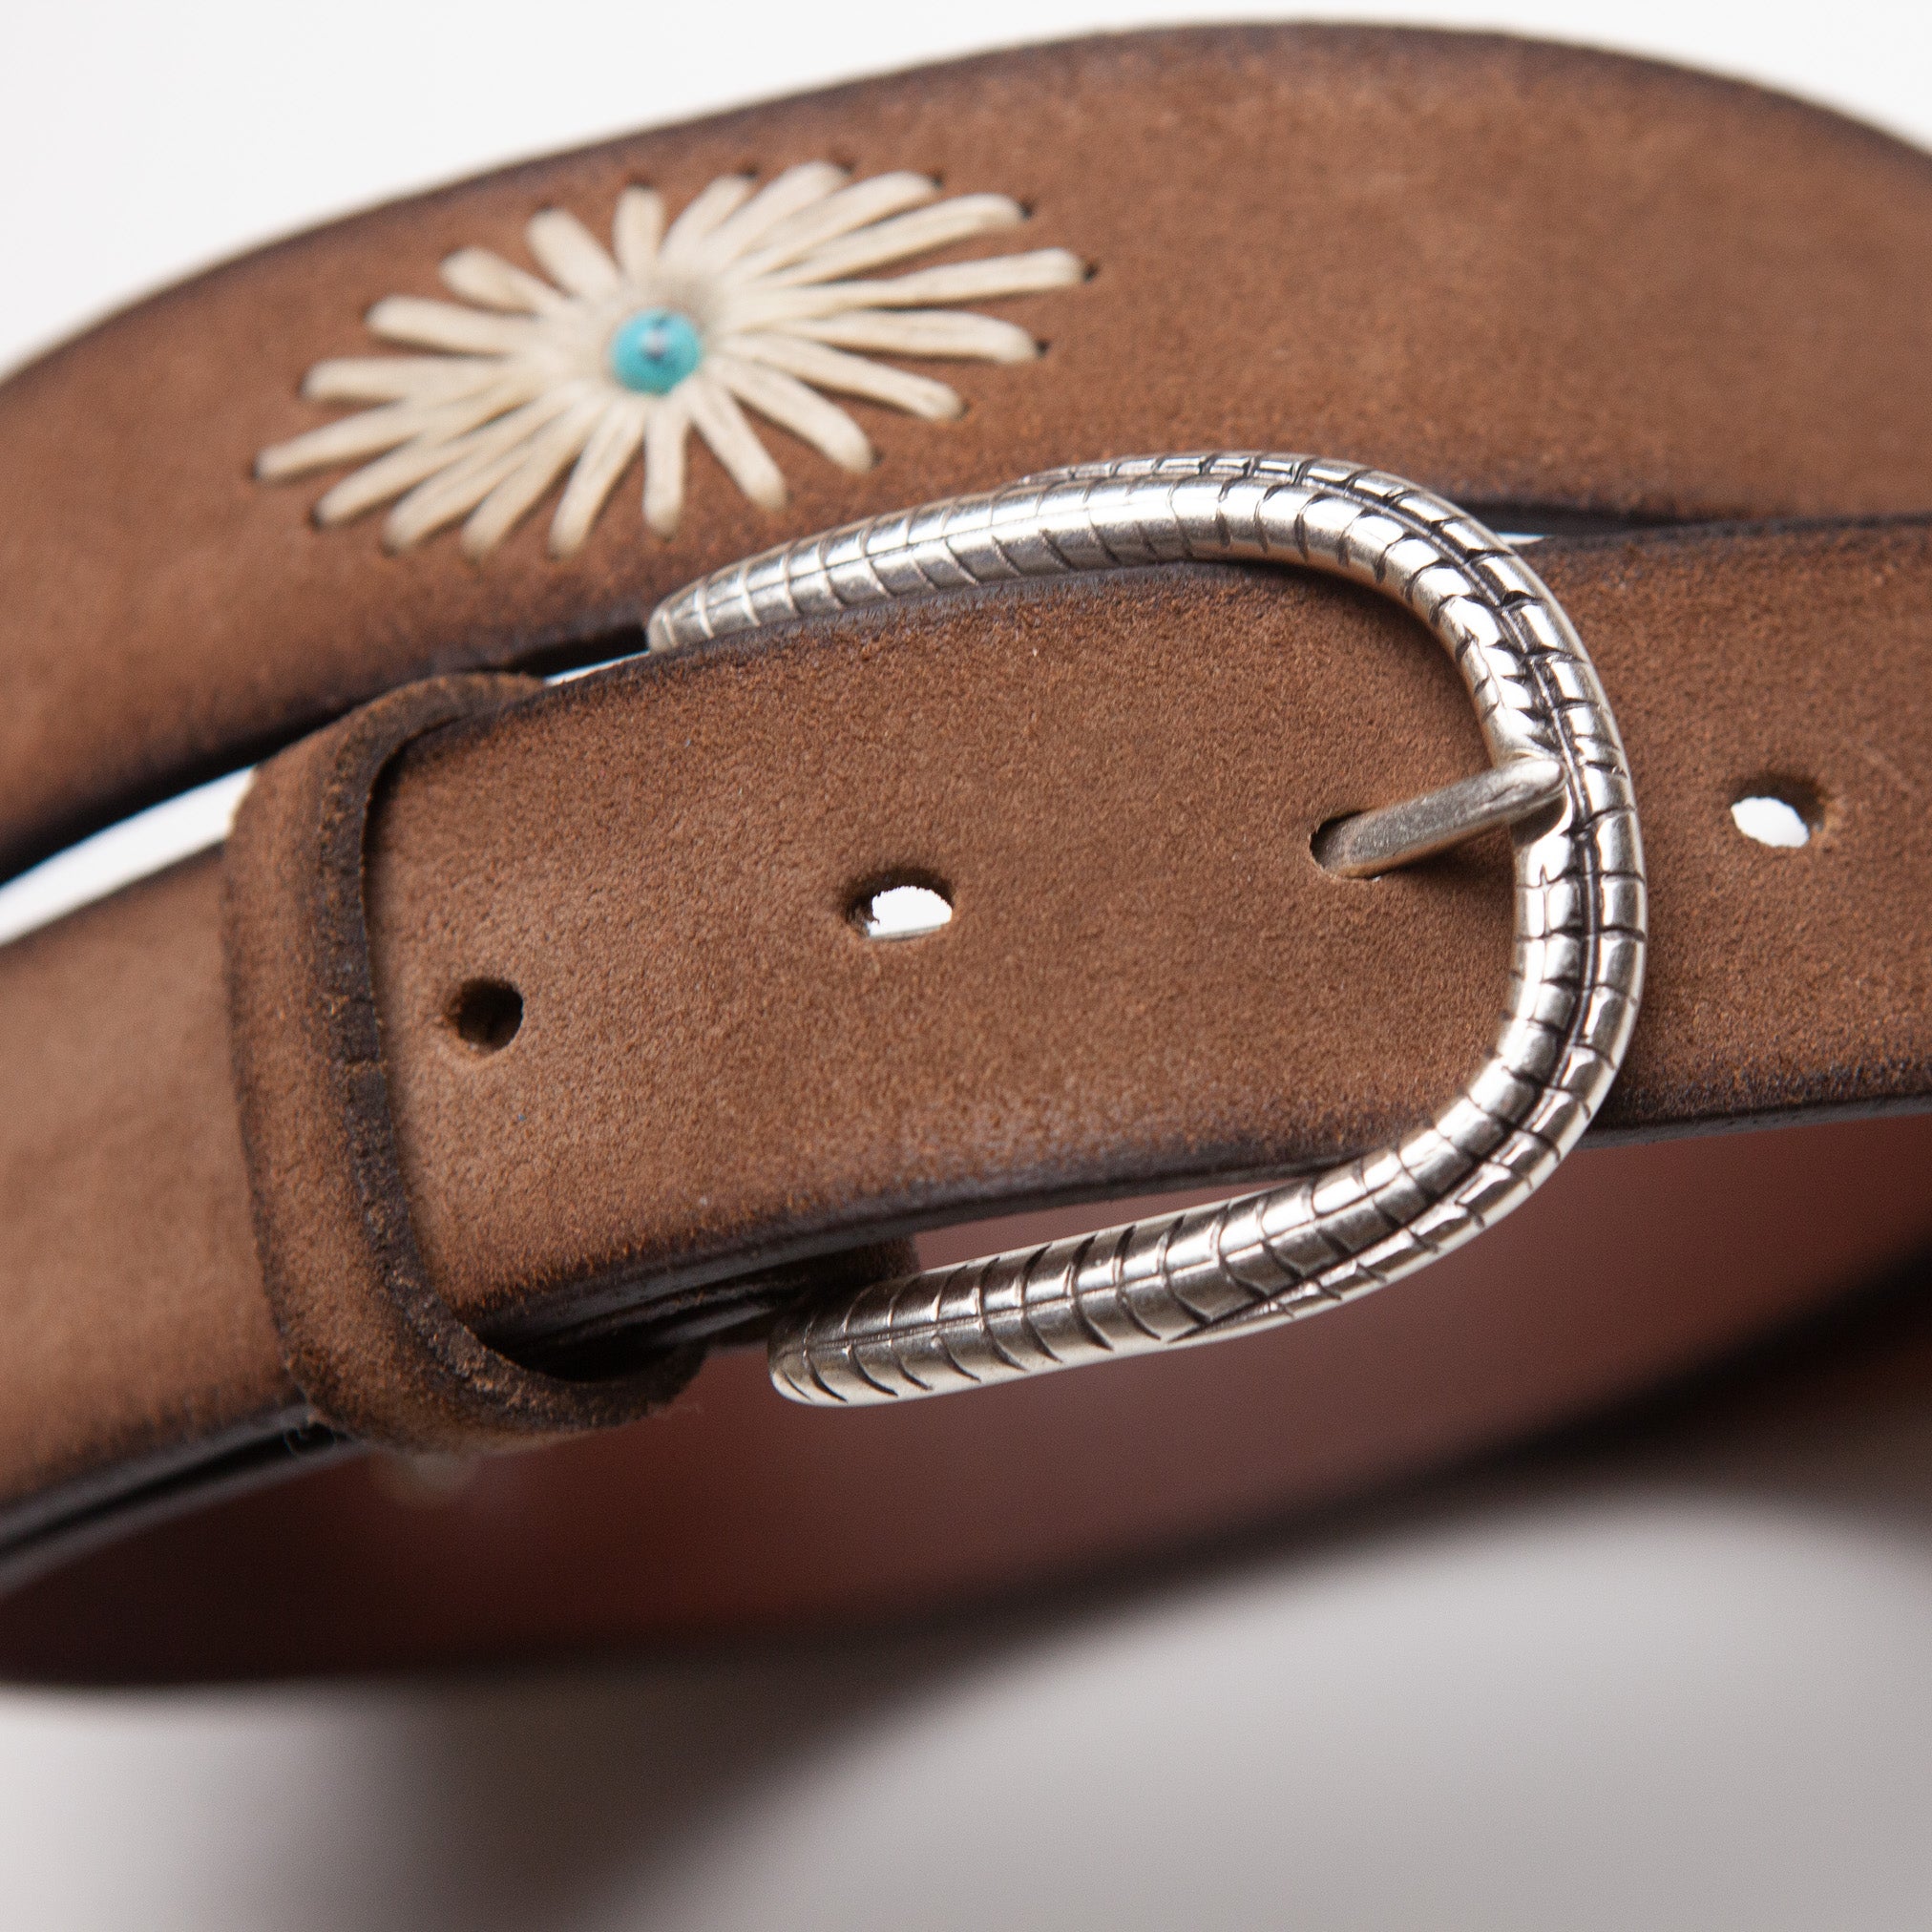 Turquoise Sun Brown Suede Belt